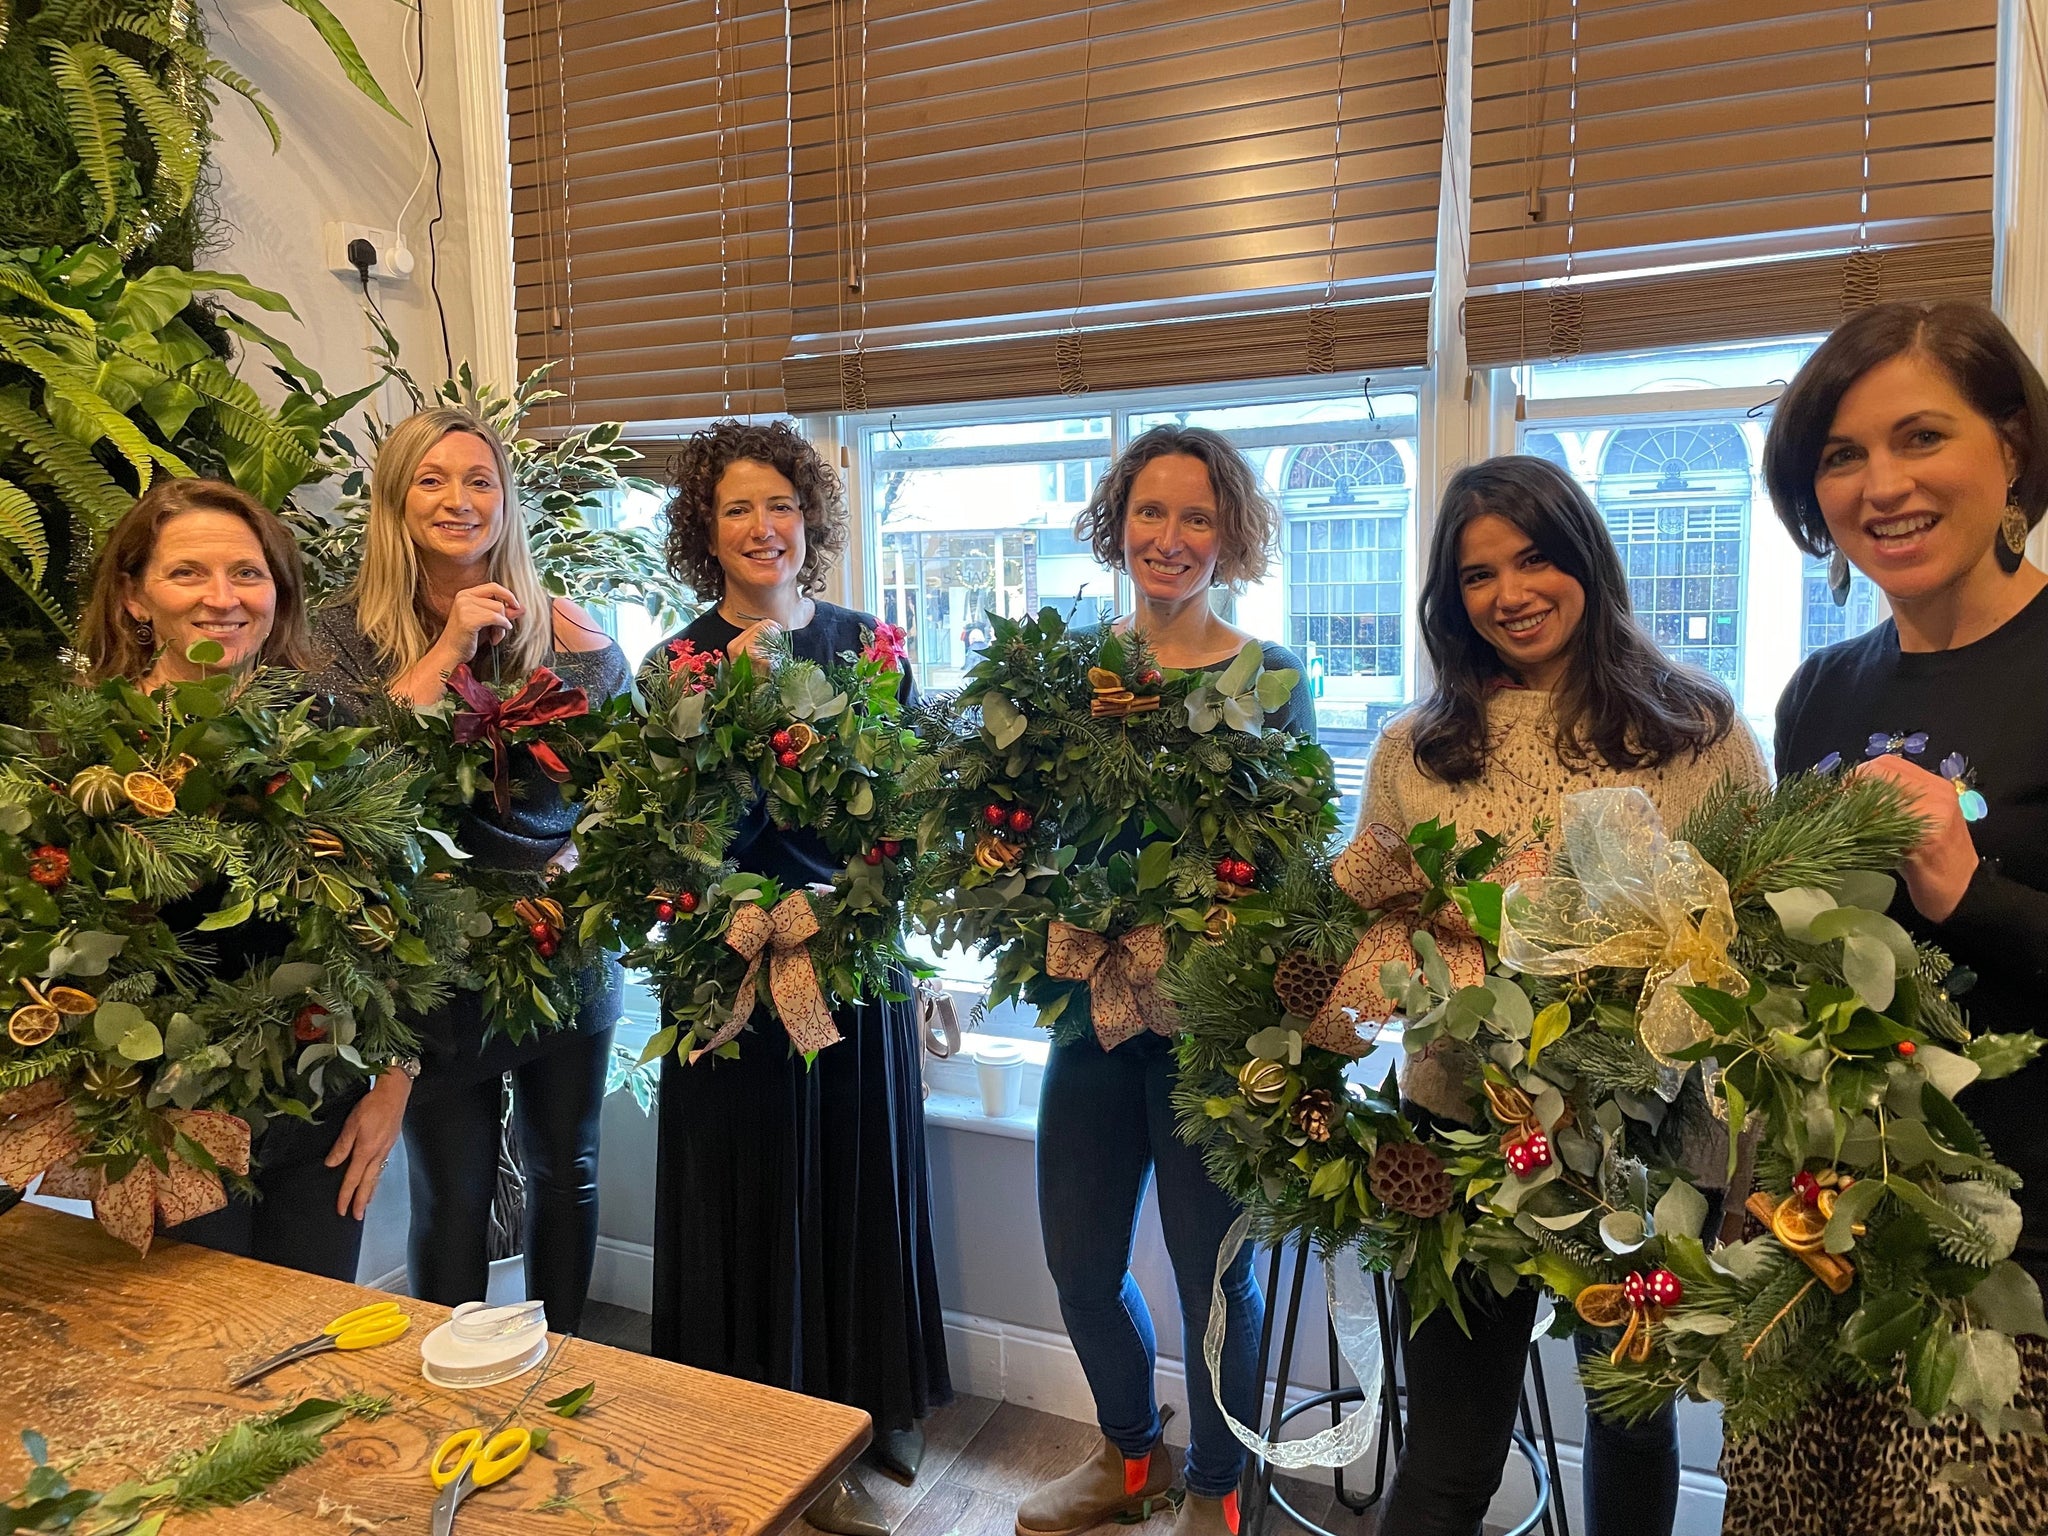 Christmas Wreath Workshop – Sunday 26th November, Starting @ 11am (£75 per person) 2.5 hours